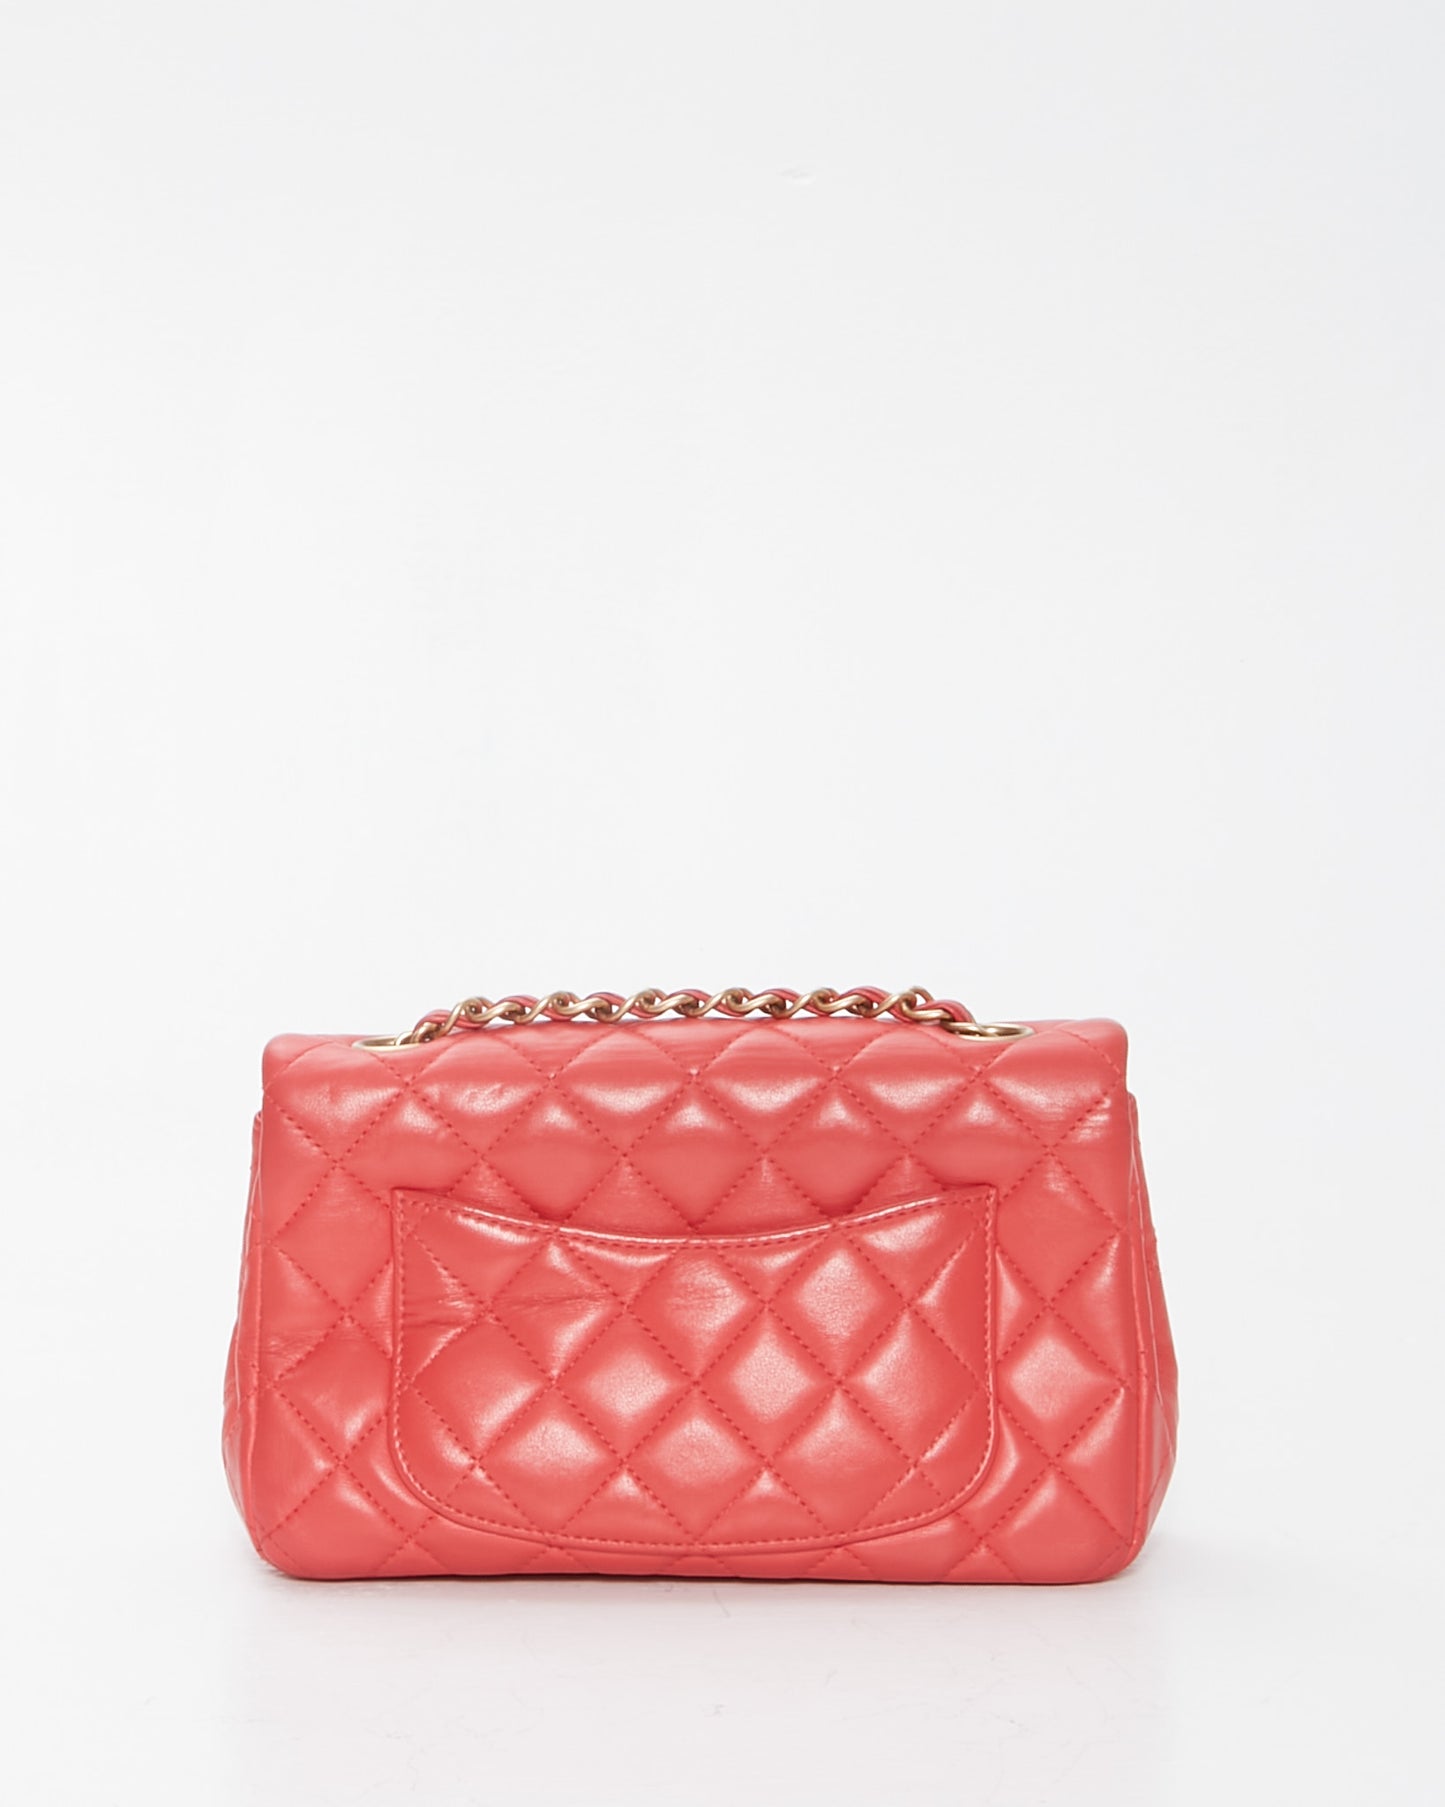 Chanel Red Quilted Leather Mini Rectangular Classic Chain Flap Bag